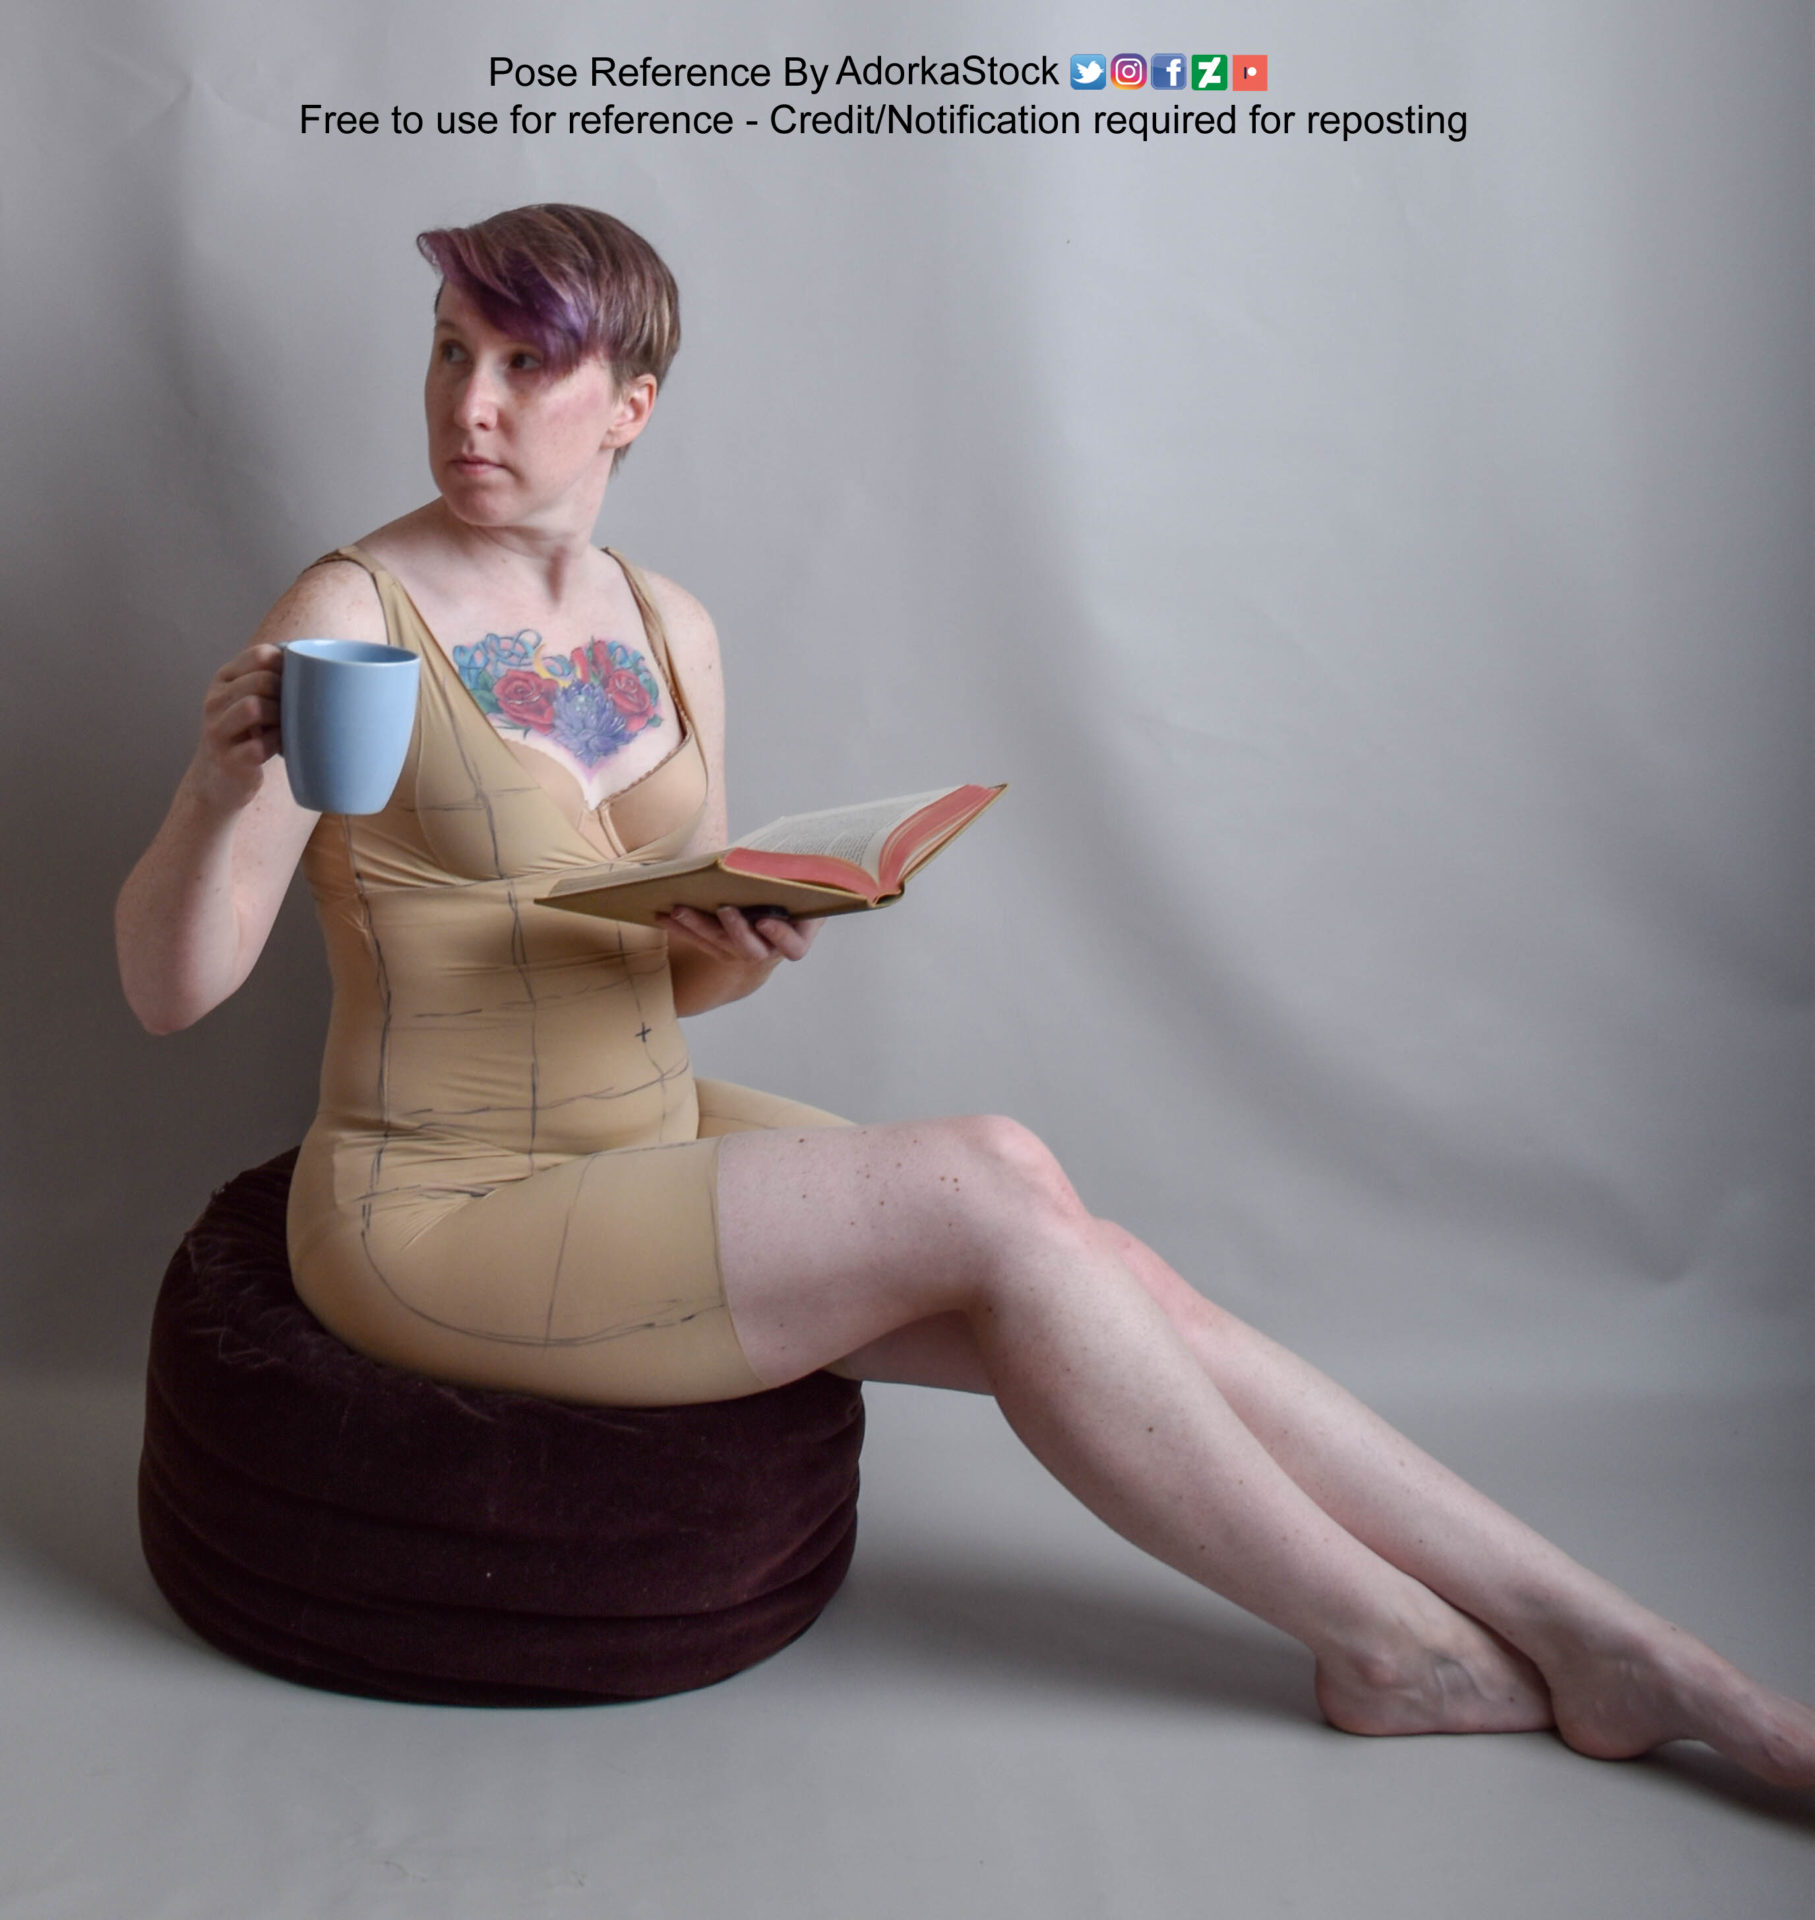 Thin, white, female pose reference model sitting on a cushion with legs to the side, holding a book and a mug